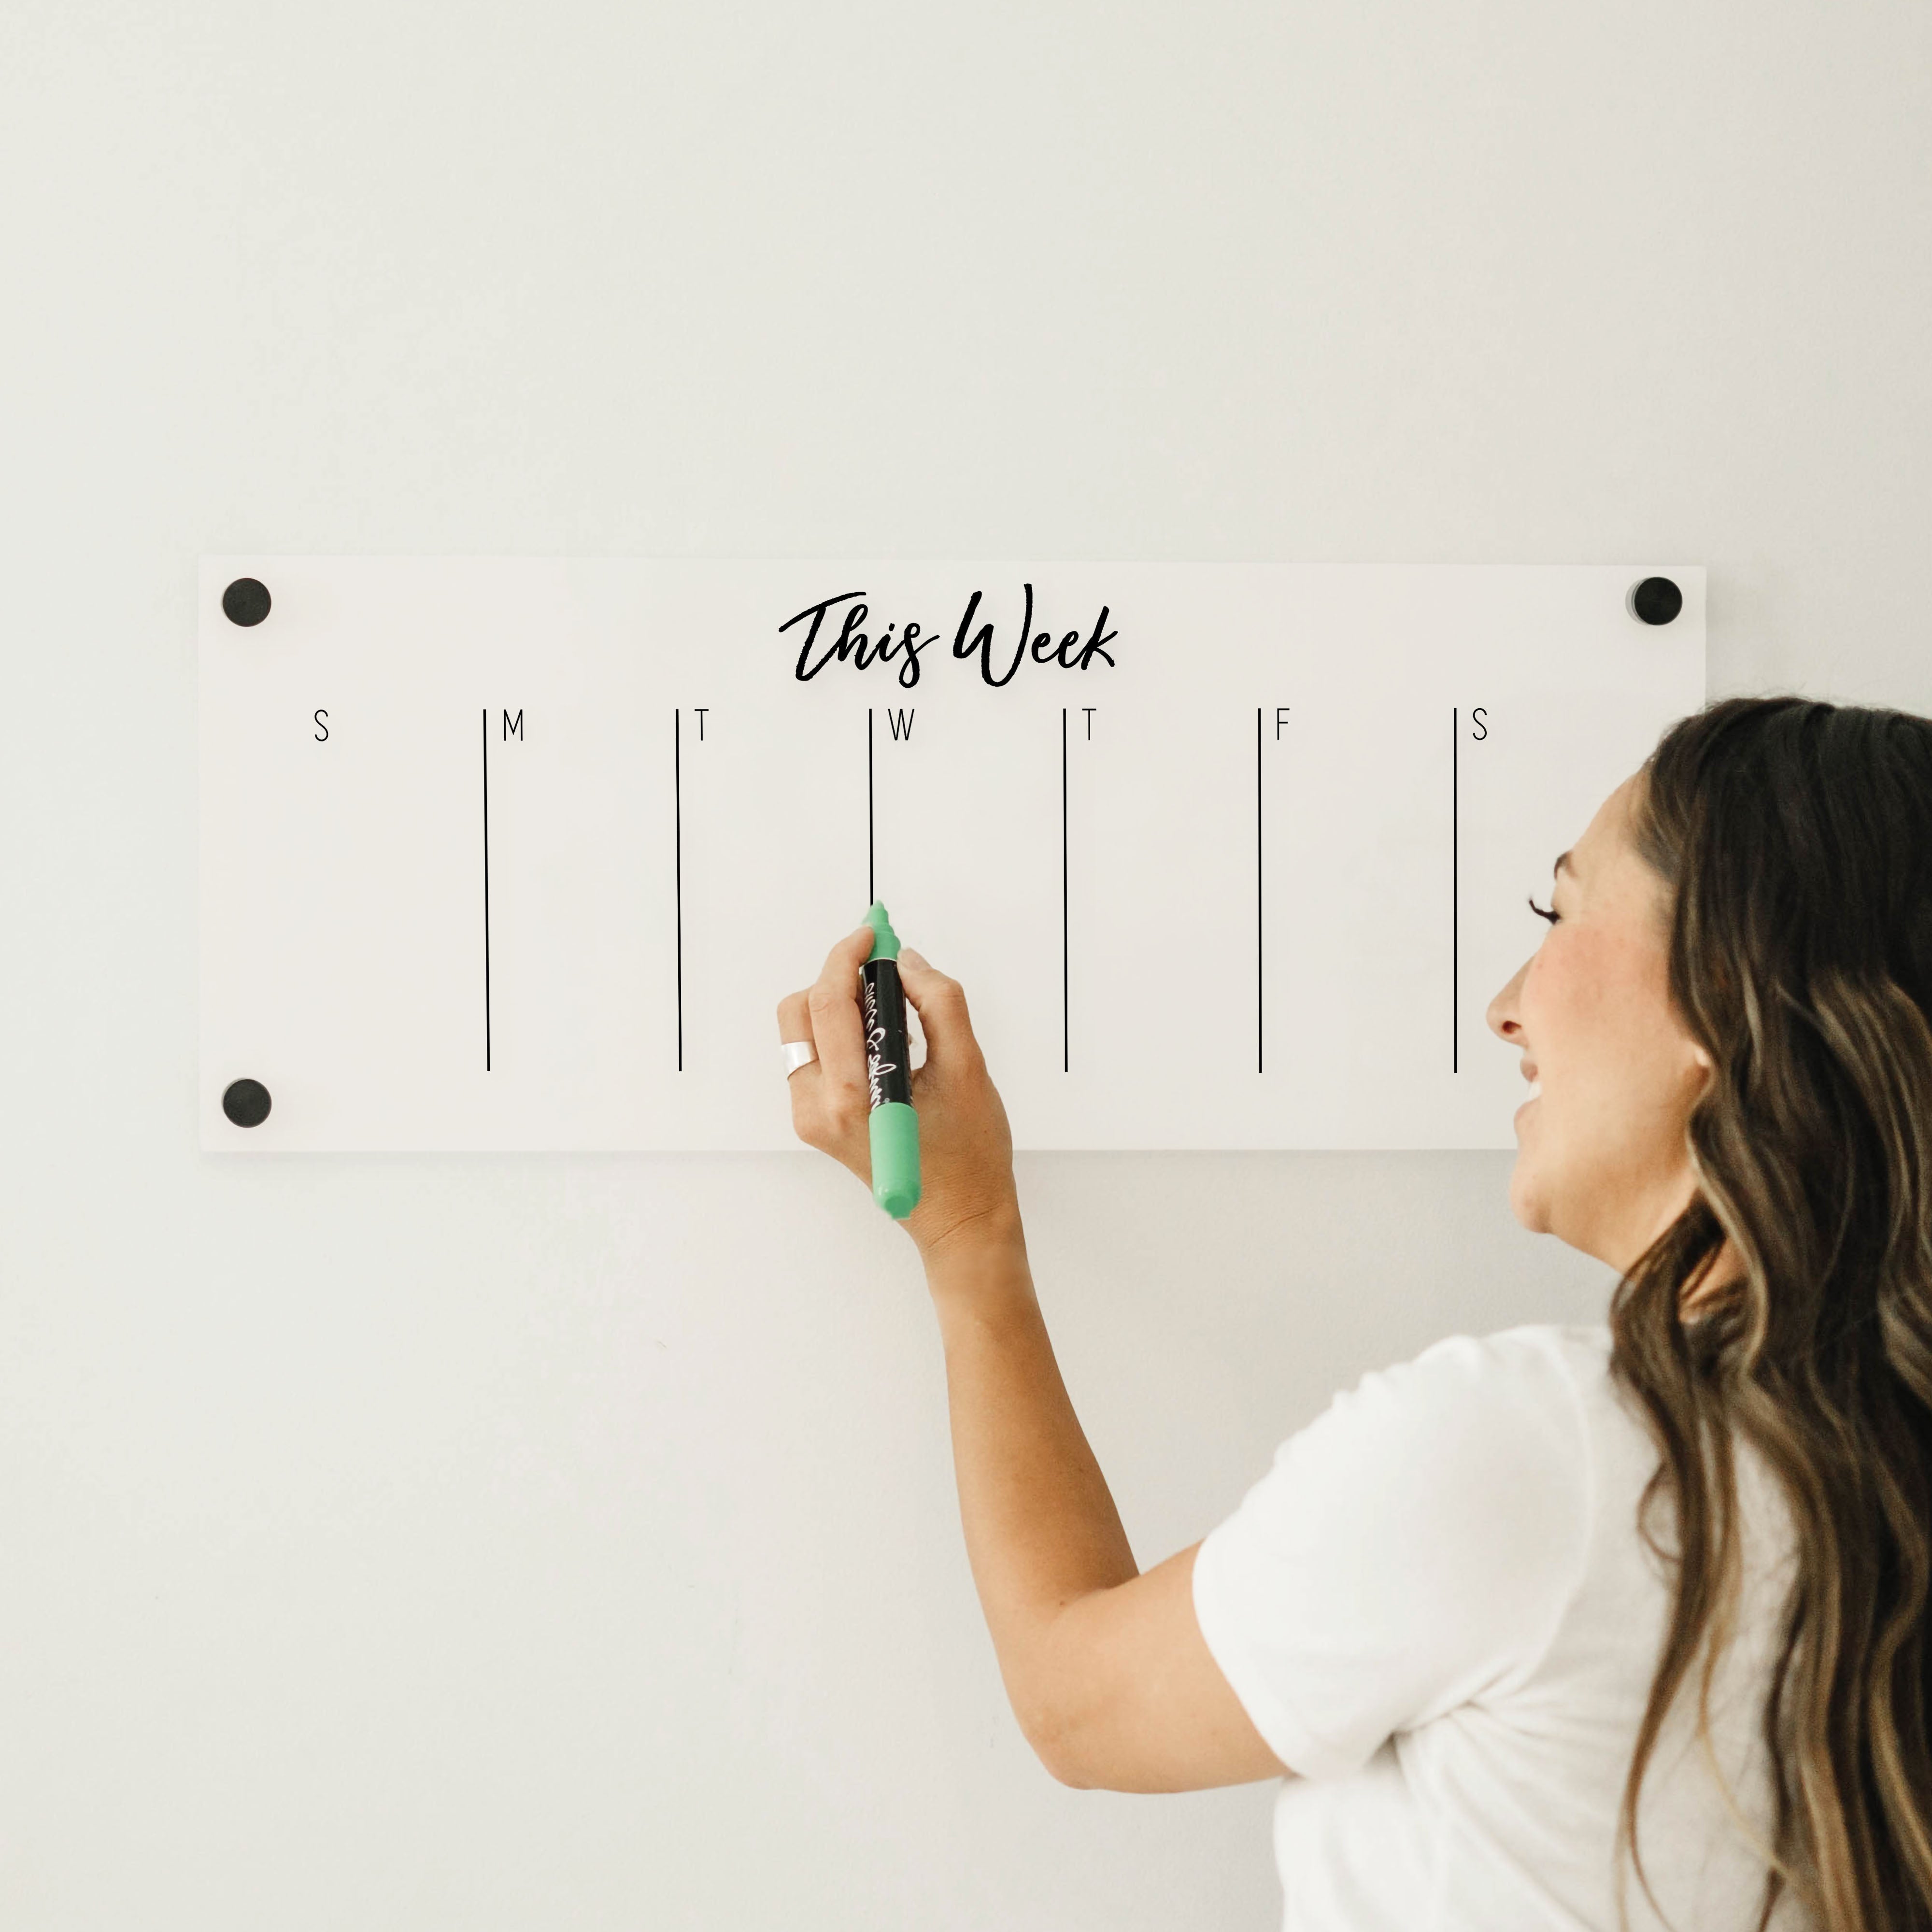 A skinny dry-erase weekly calender made of acrylic hanging on the wall